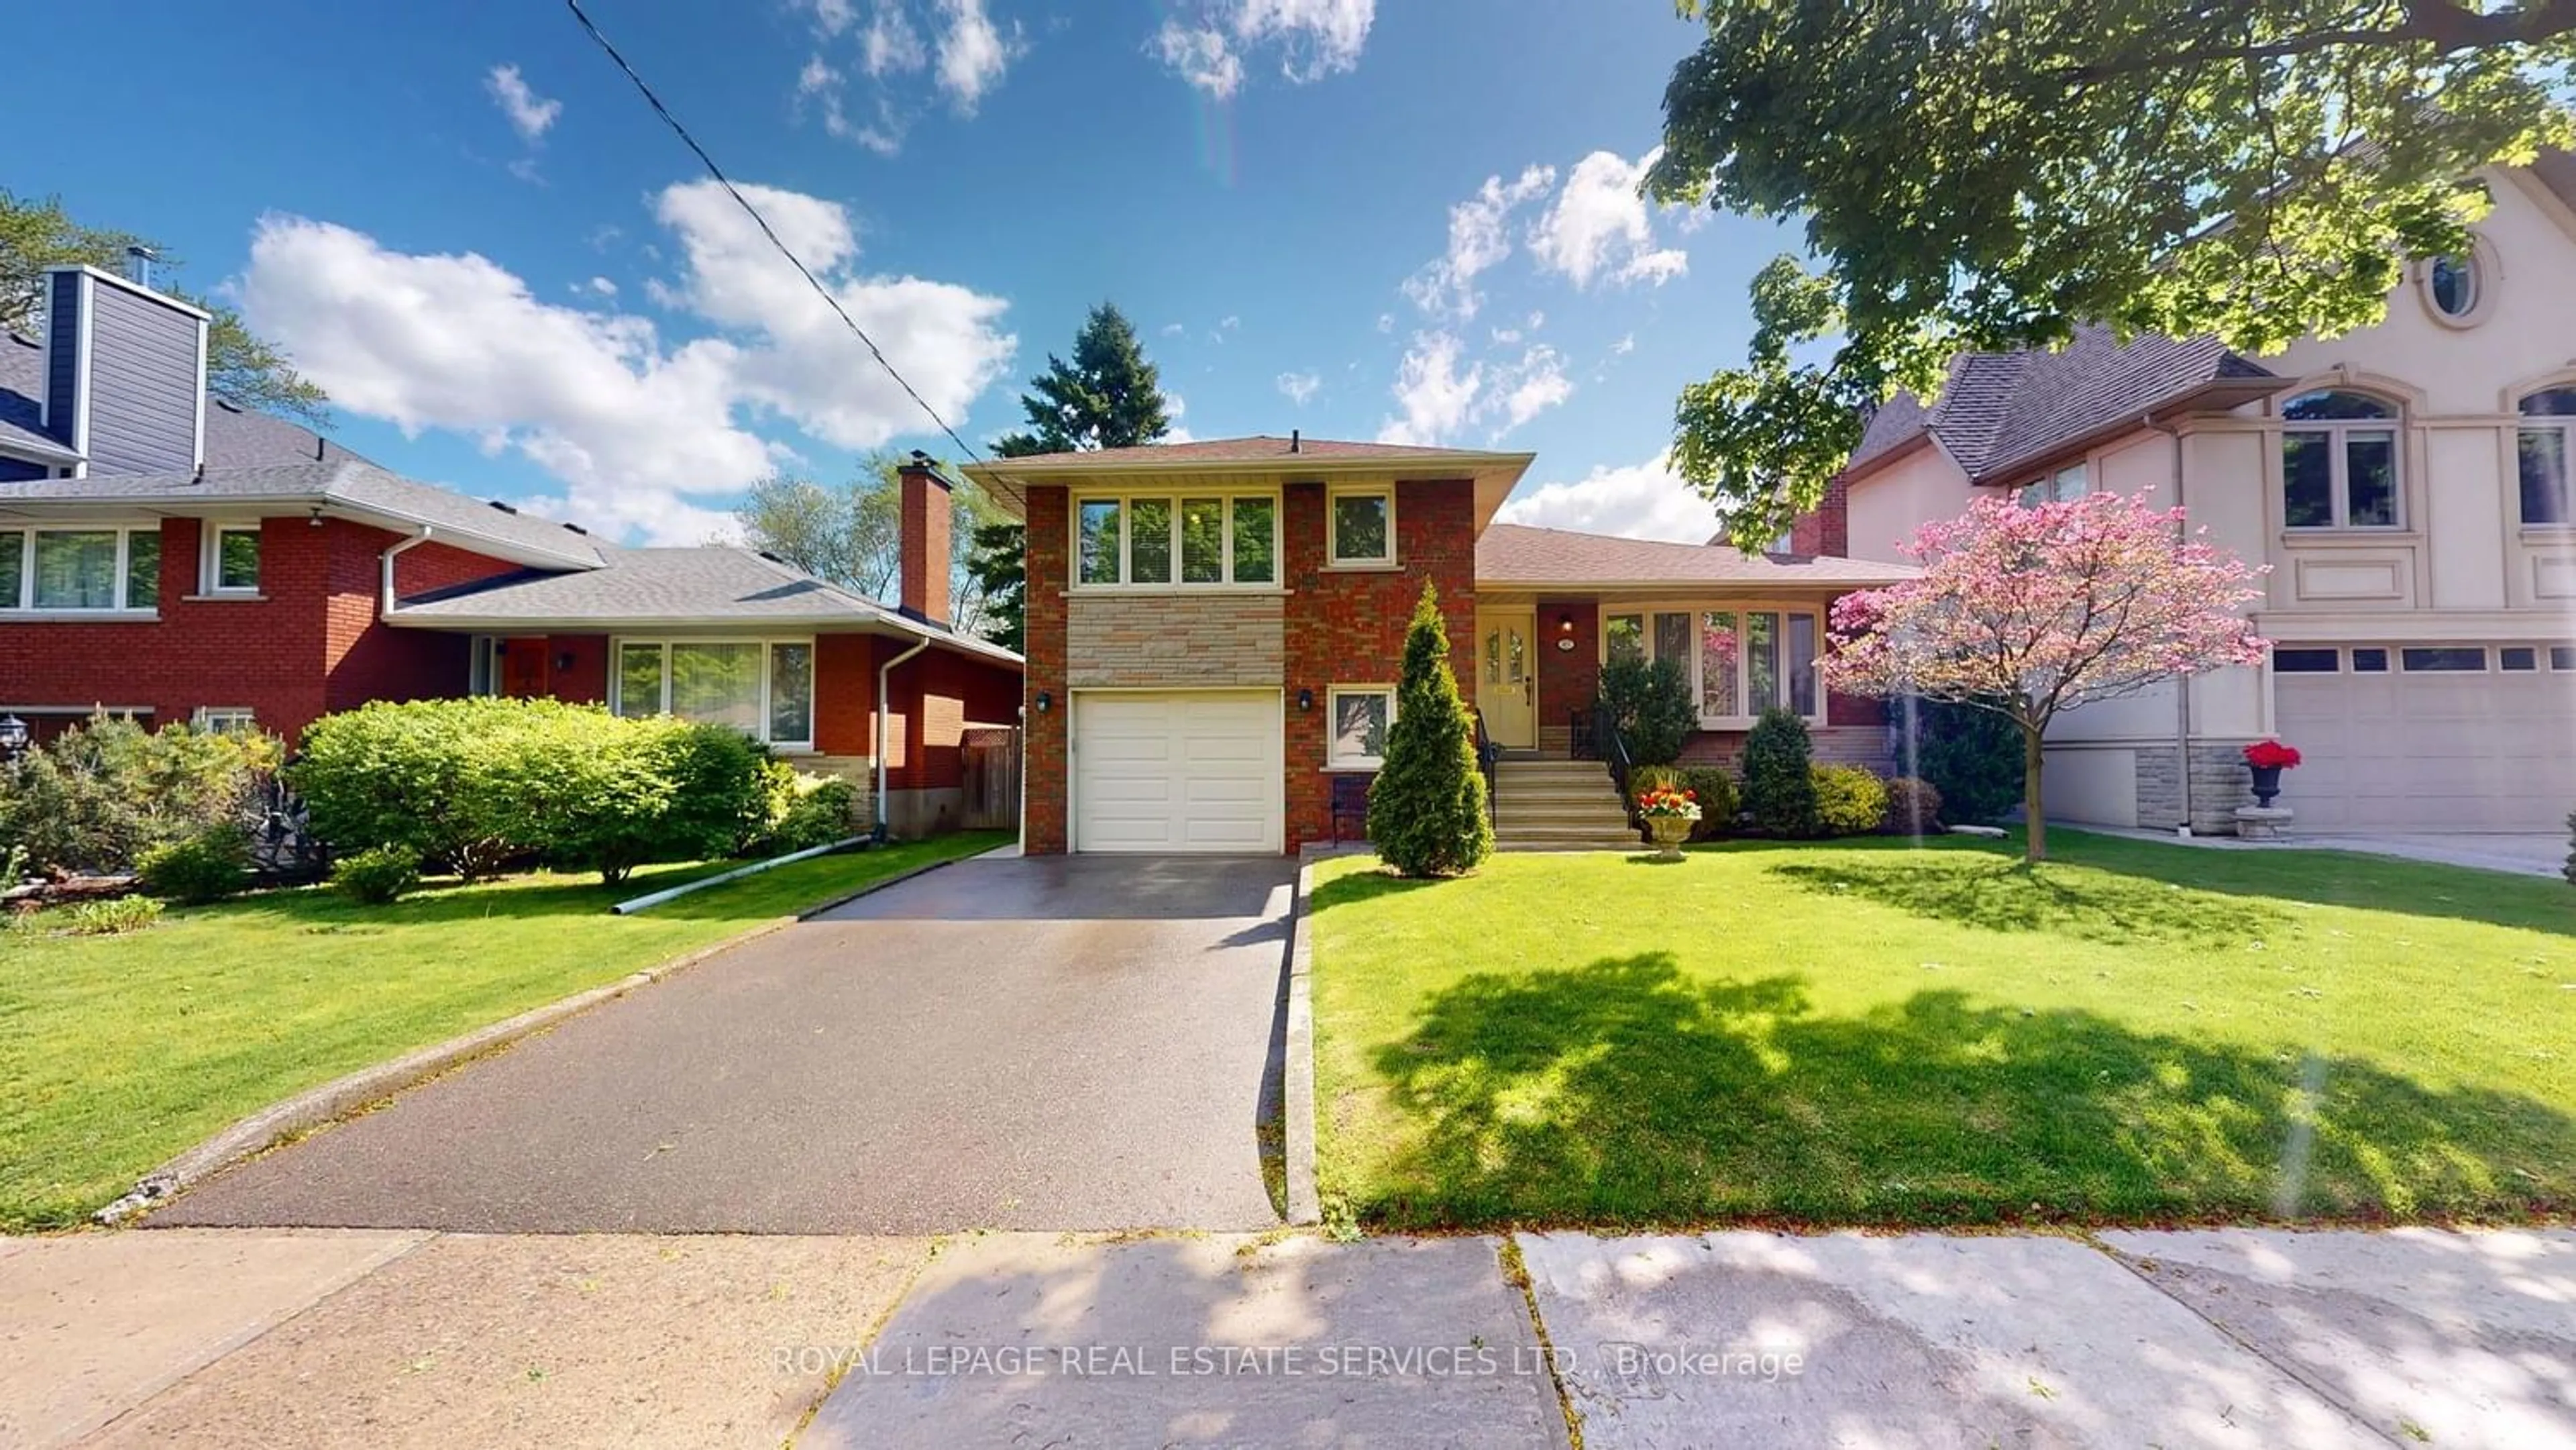 Frontside or backside of a home for 87 Smithwood Dr, Toronto Ontario M9B 4S3